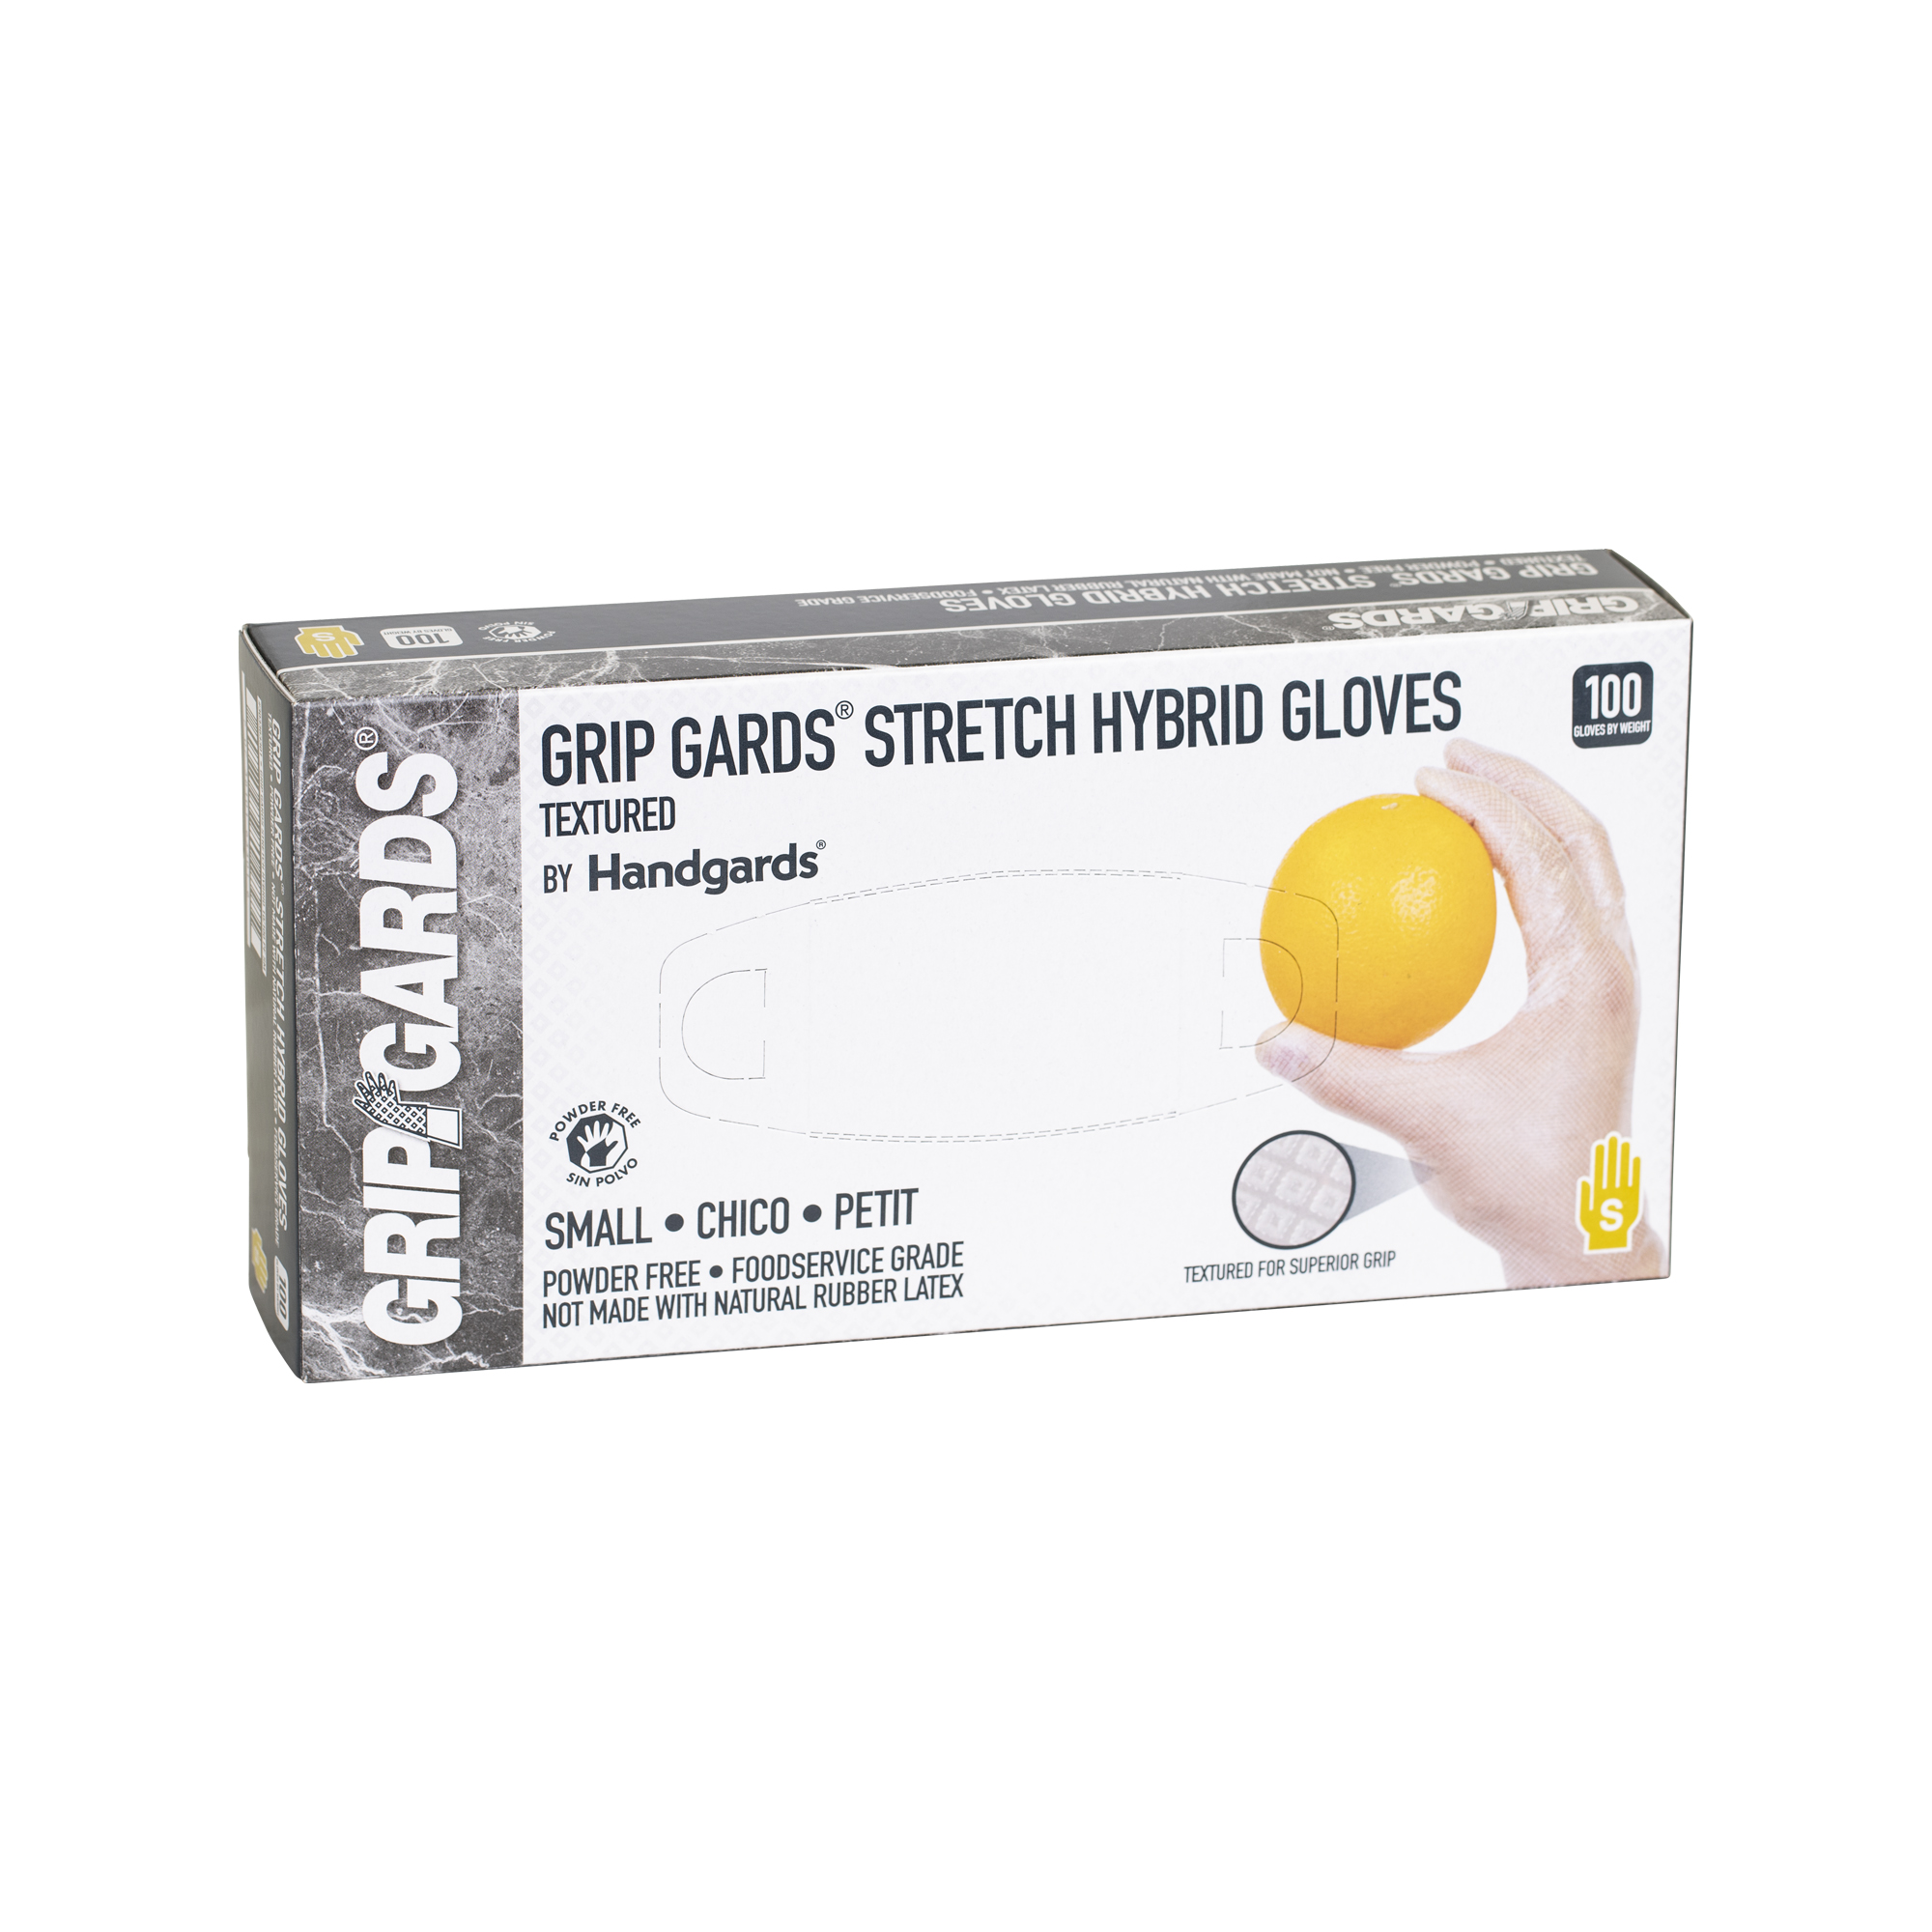 Gripgards® Stretch Hybrid Clear Disposable Gloves – Handgards